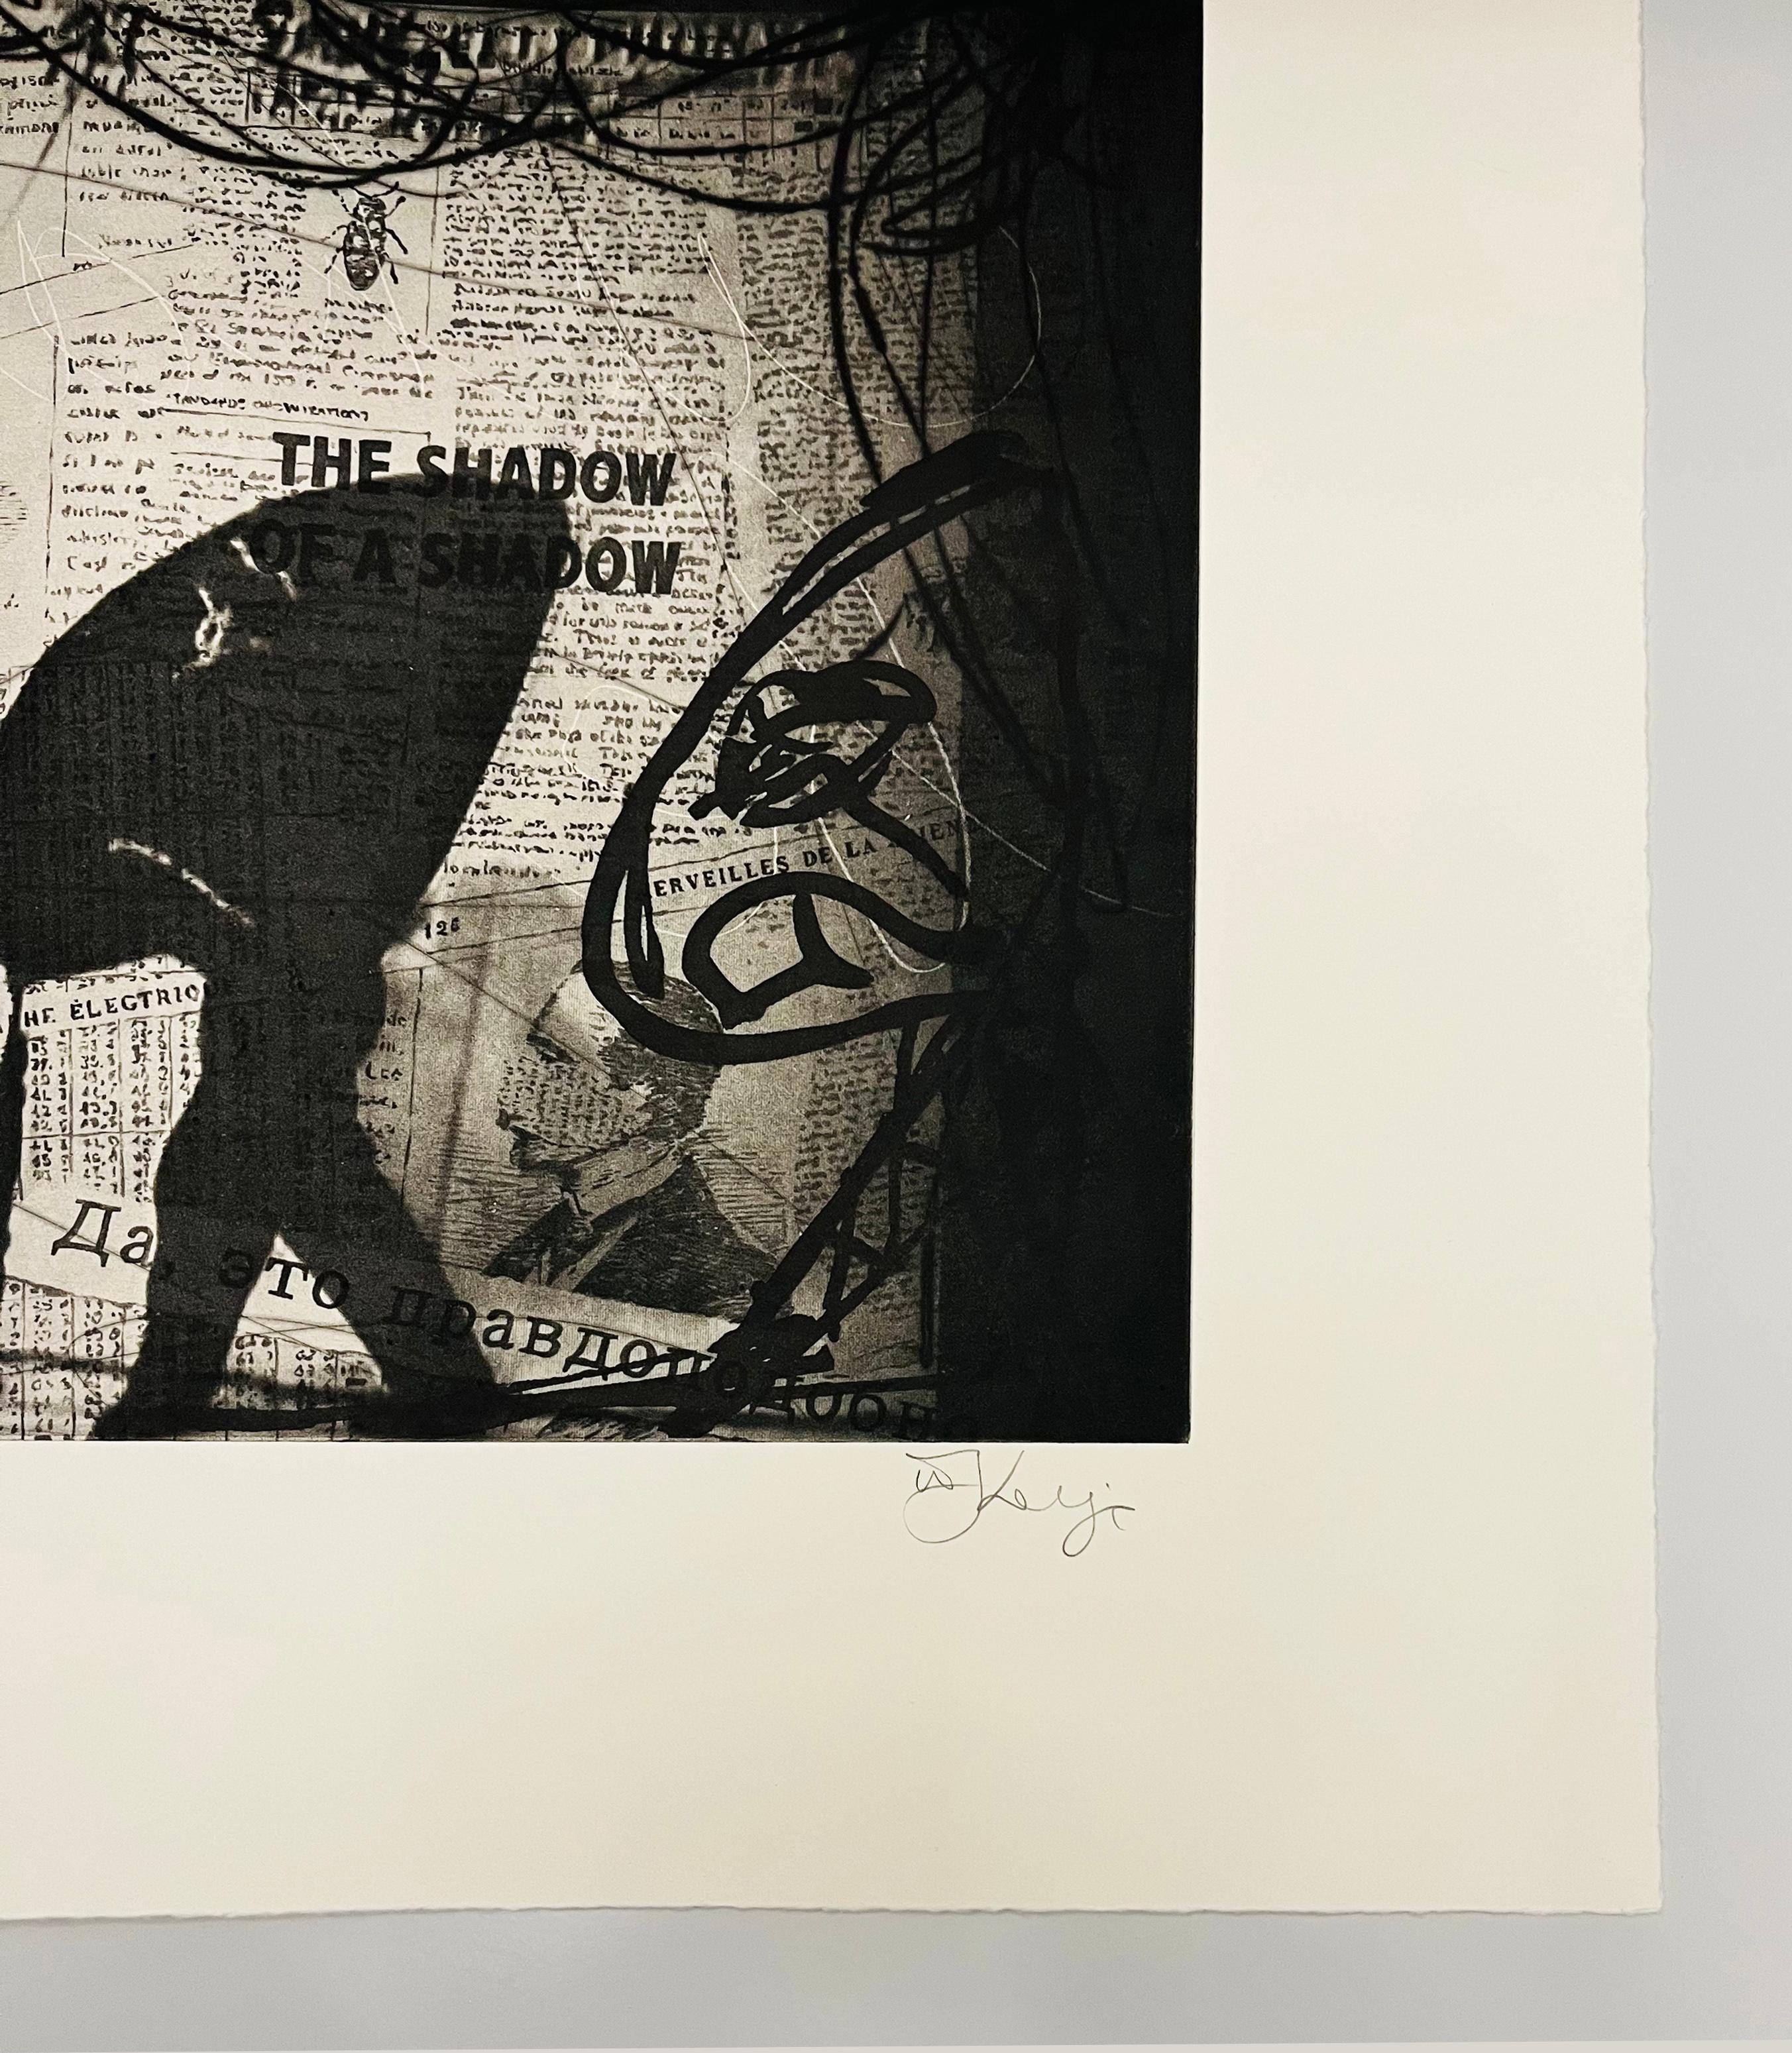 This is a monochromatic photogravure, aquatint and drypoint on Hahnemuhle Copperplate warm white paper. Created in 2010, it is signed in pencil lower right and numbered from the edition of 70. The image dimensions are 10 5/8 by 16 5/8 inches. The